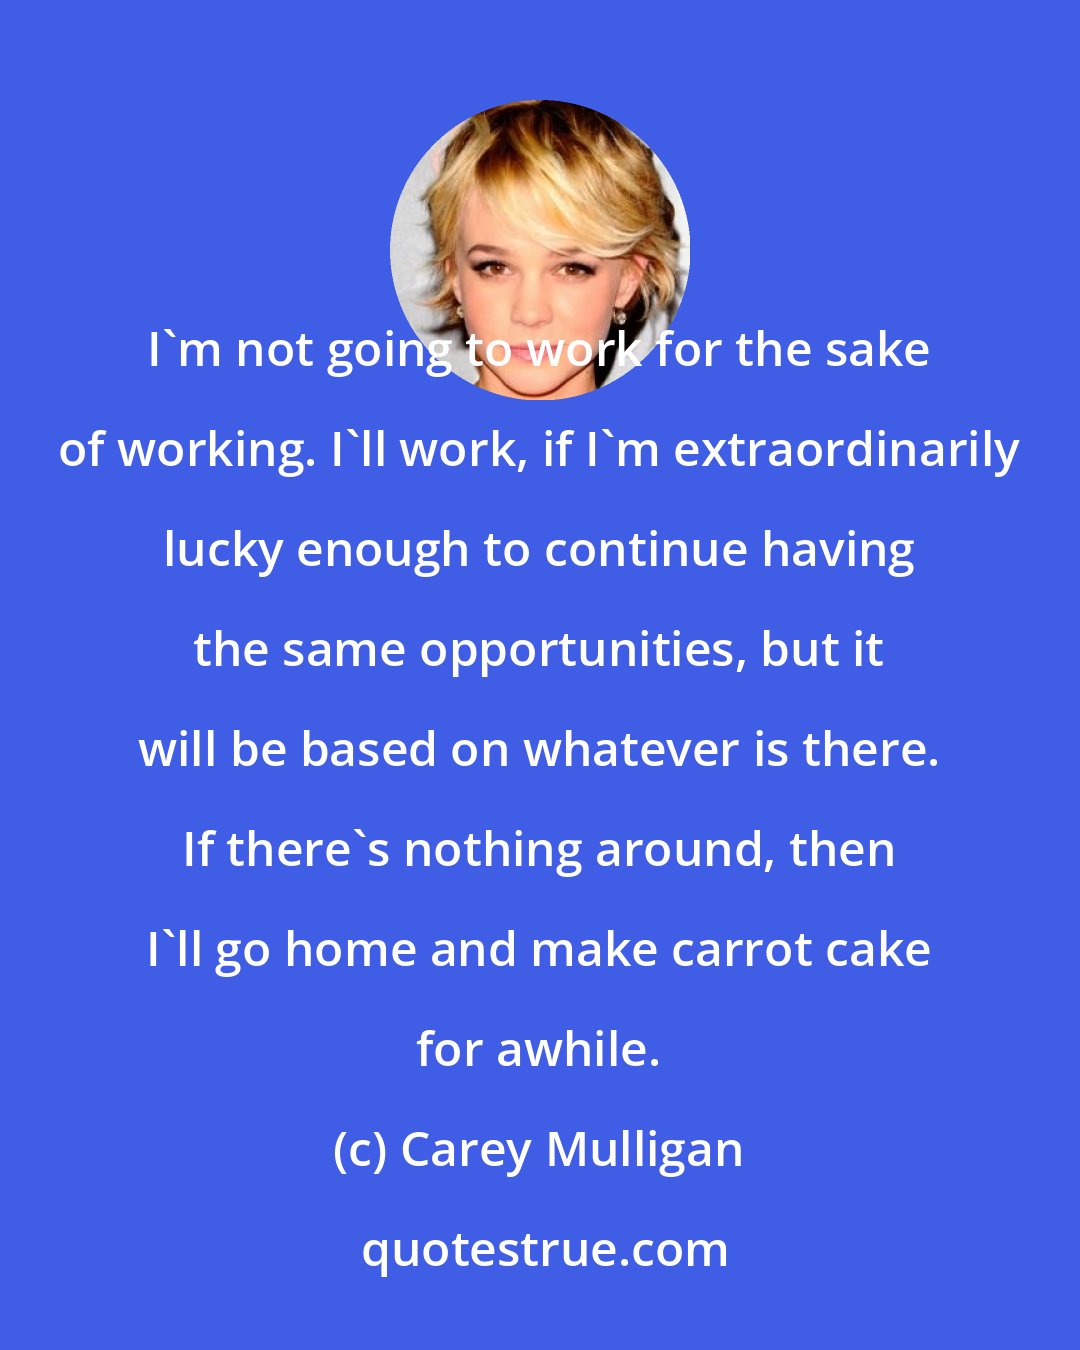 Carey Mulligan: I'm not going to work for the sake of working. I'll work, if I'm extraordinarily lucky enough to continue having the same opportunities, but it will be based on whatever is there. If there's nothing around, then I'll go home and make carrot cake for awhile.